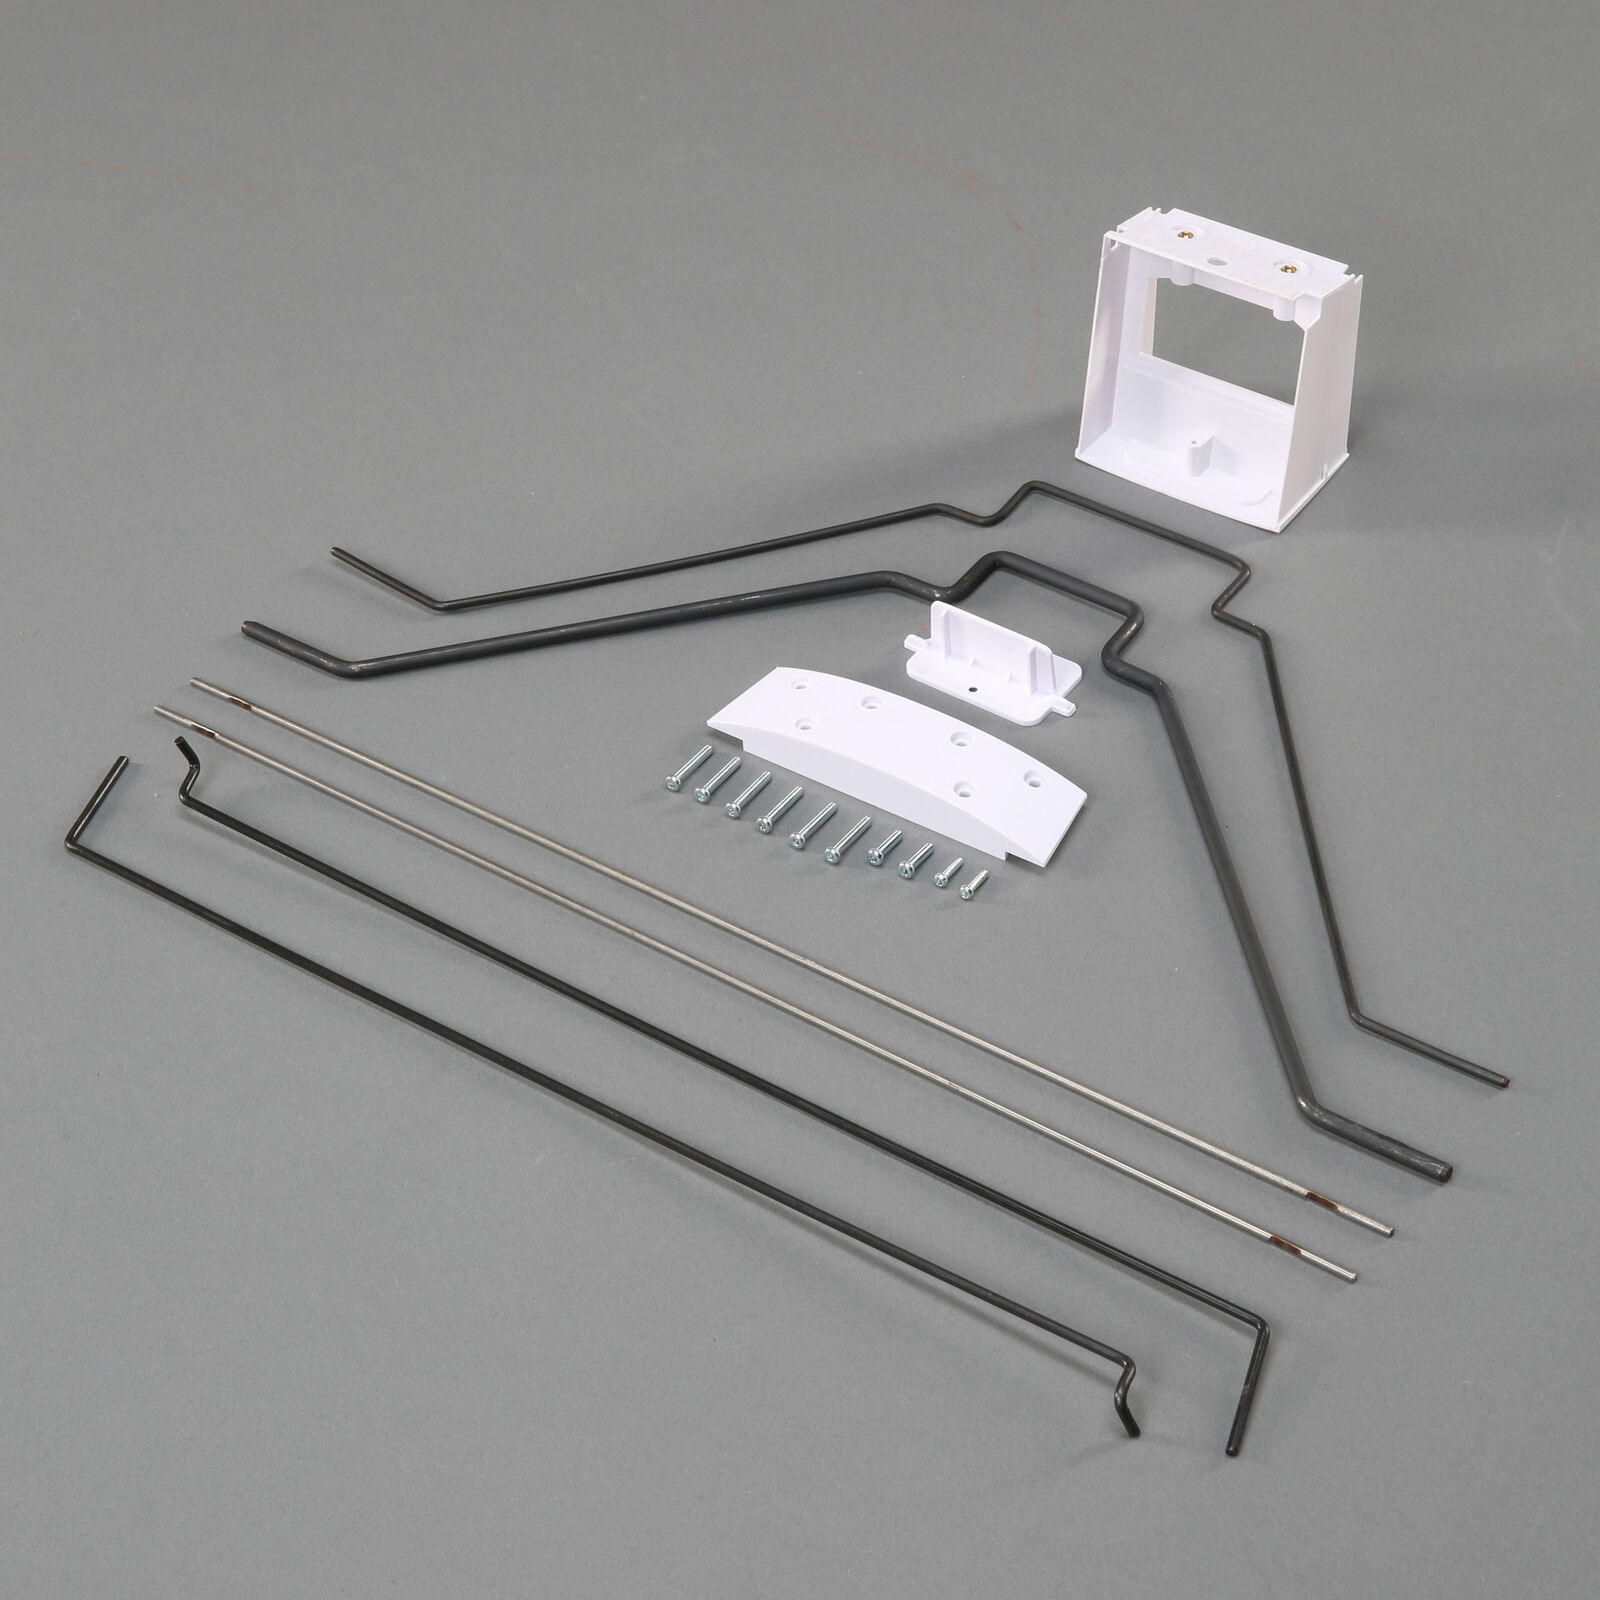 Wire Float Mounting Set; C-Z C150 2.1m, Turbo Timber SWS 2.0m